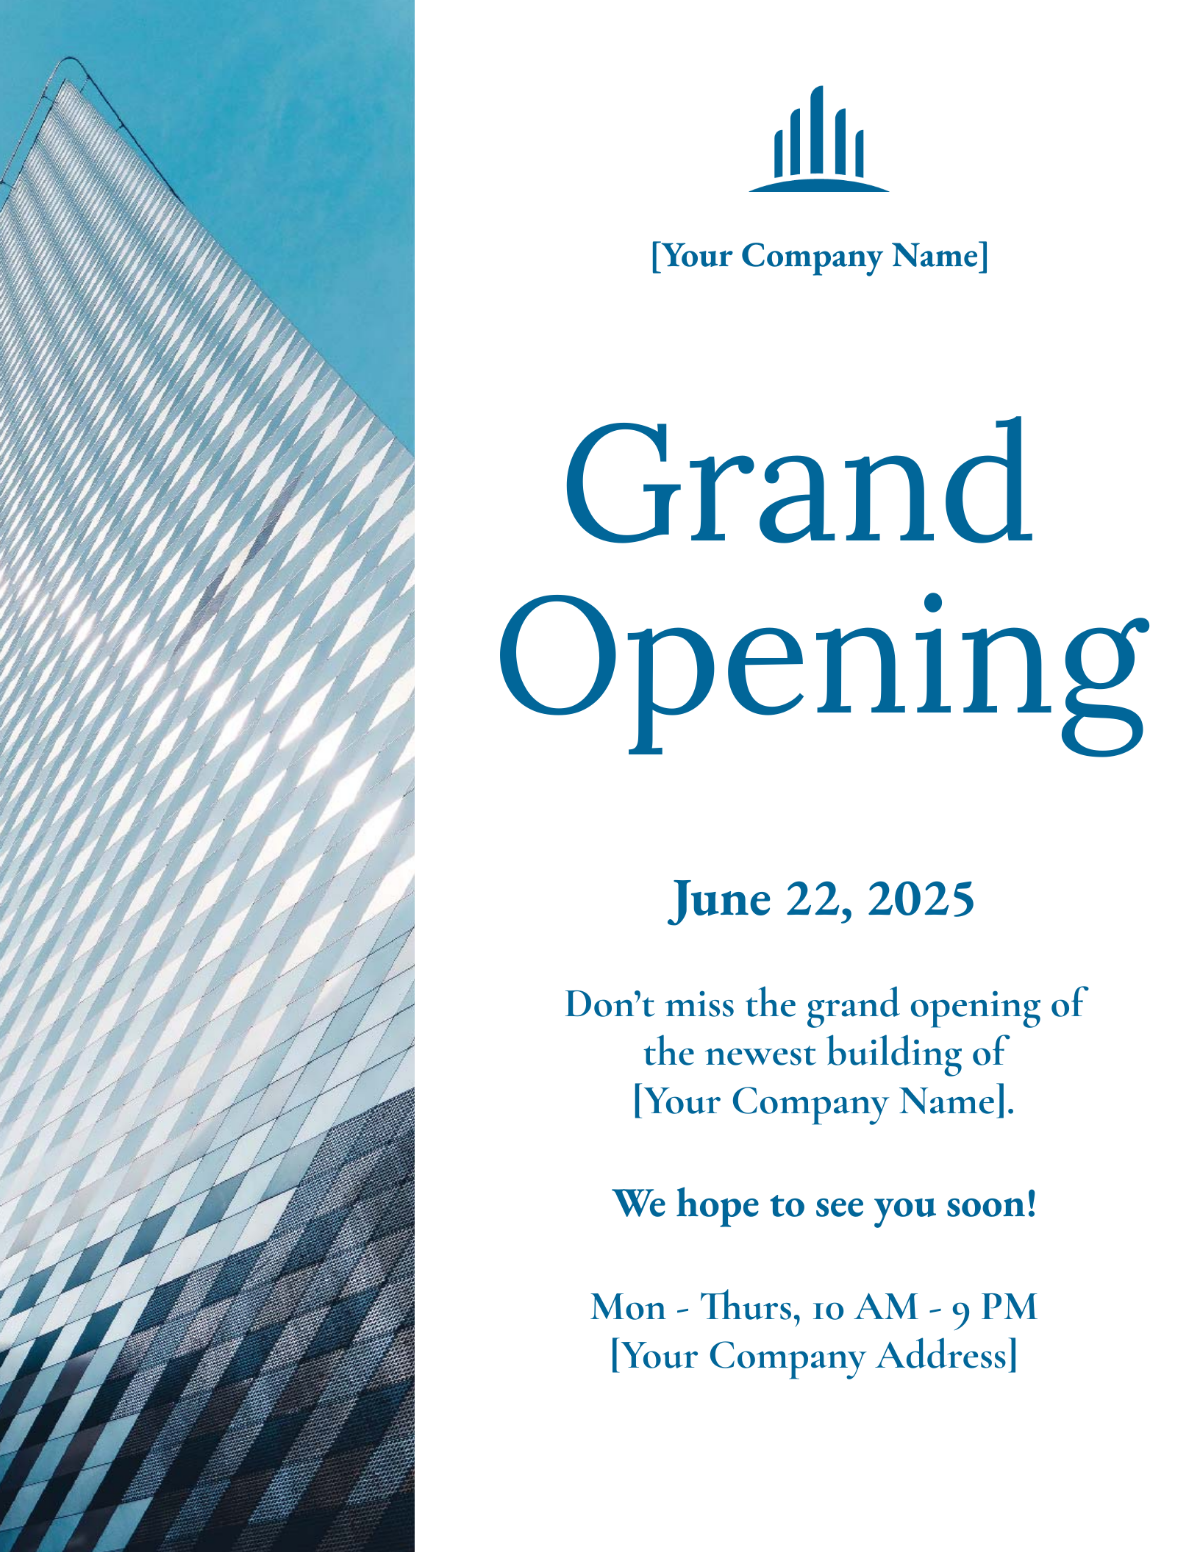 Company Grand Opening Flyer